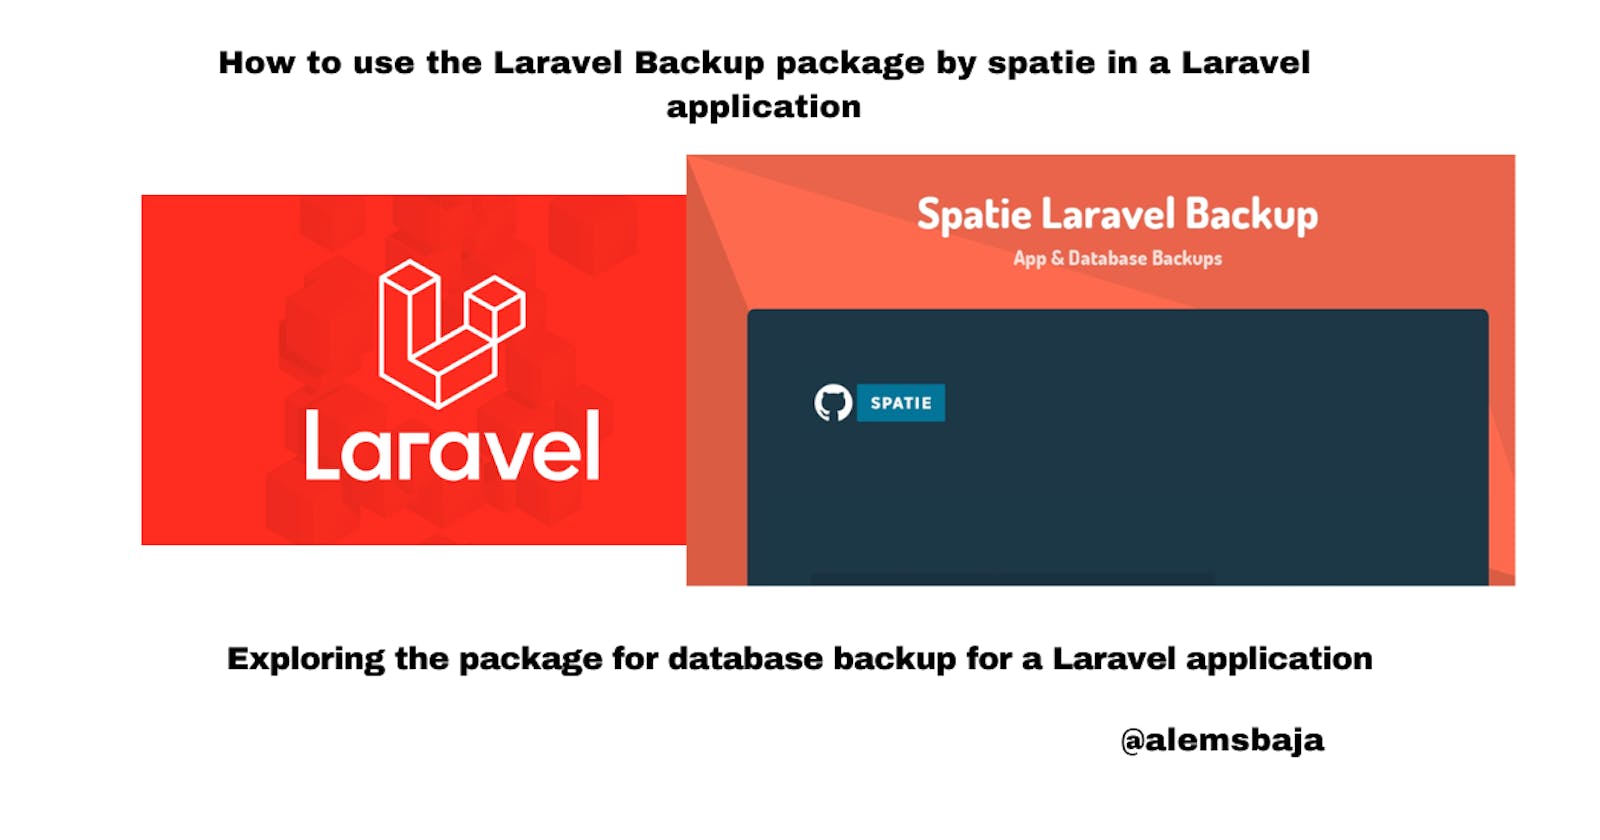 How to use the Laravel Backup package by spatie in a Laravel application